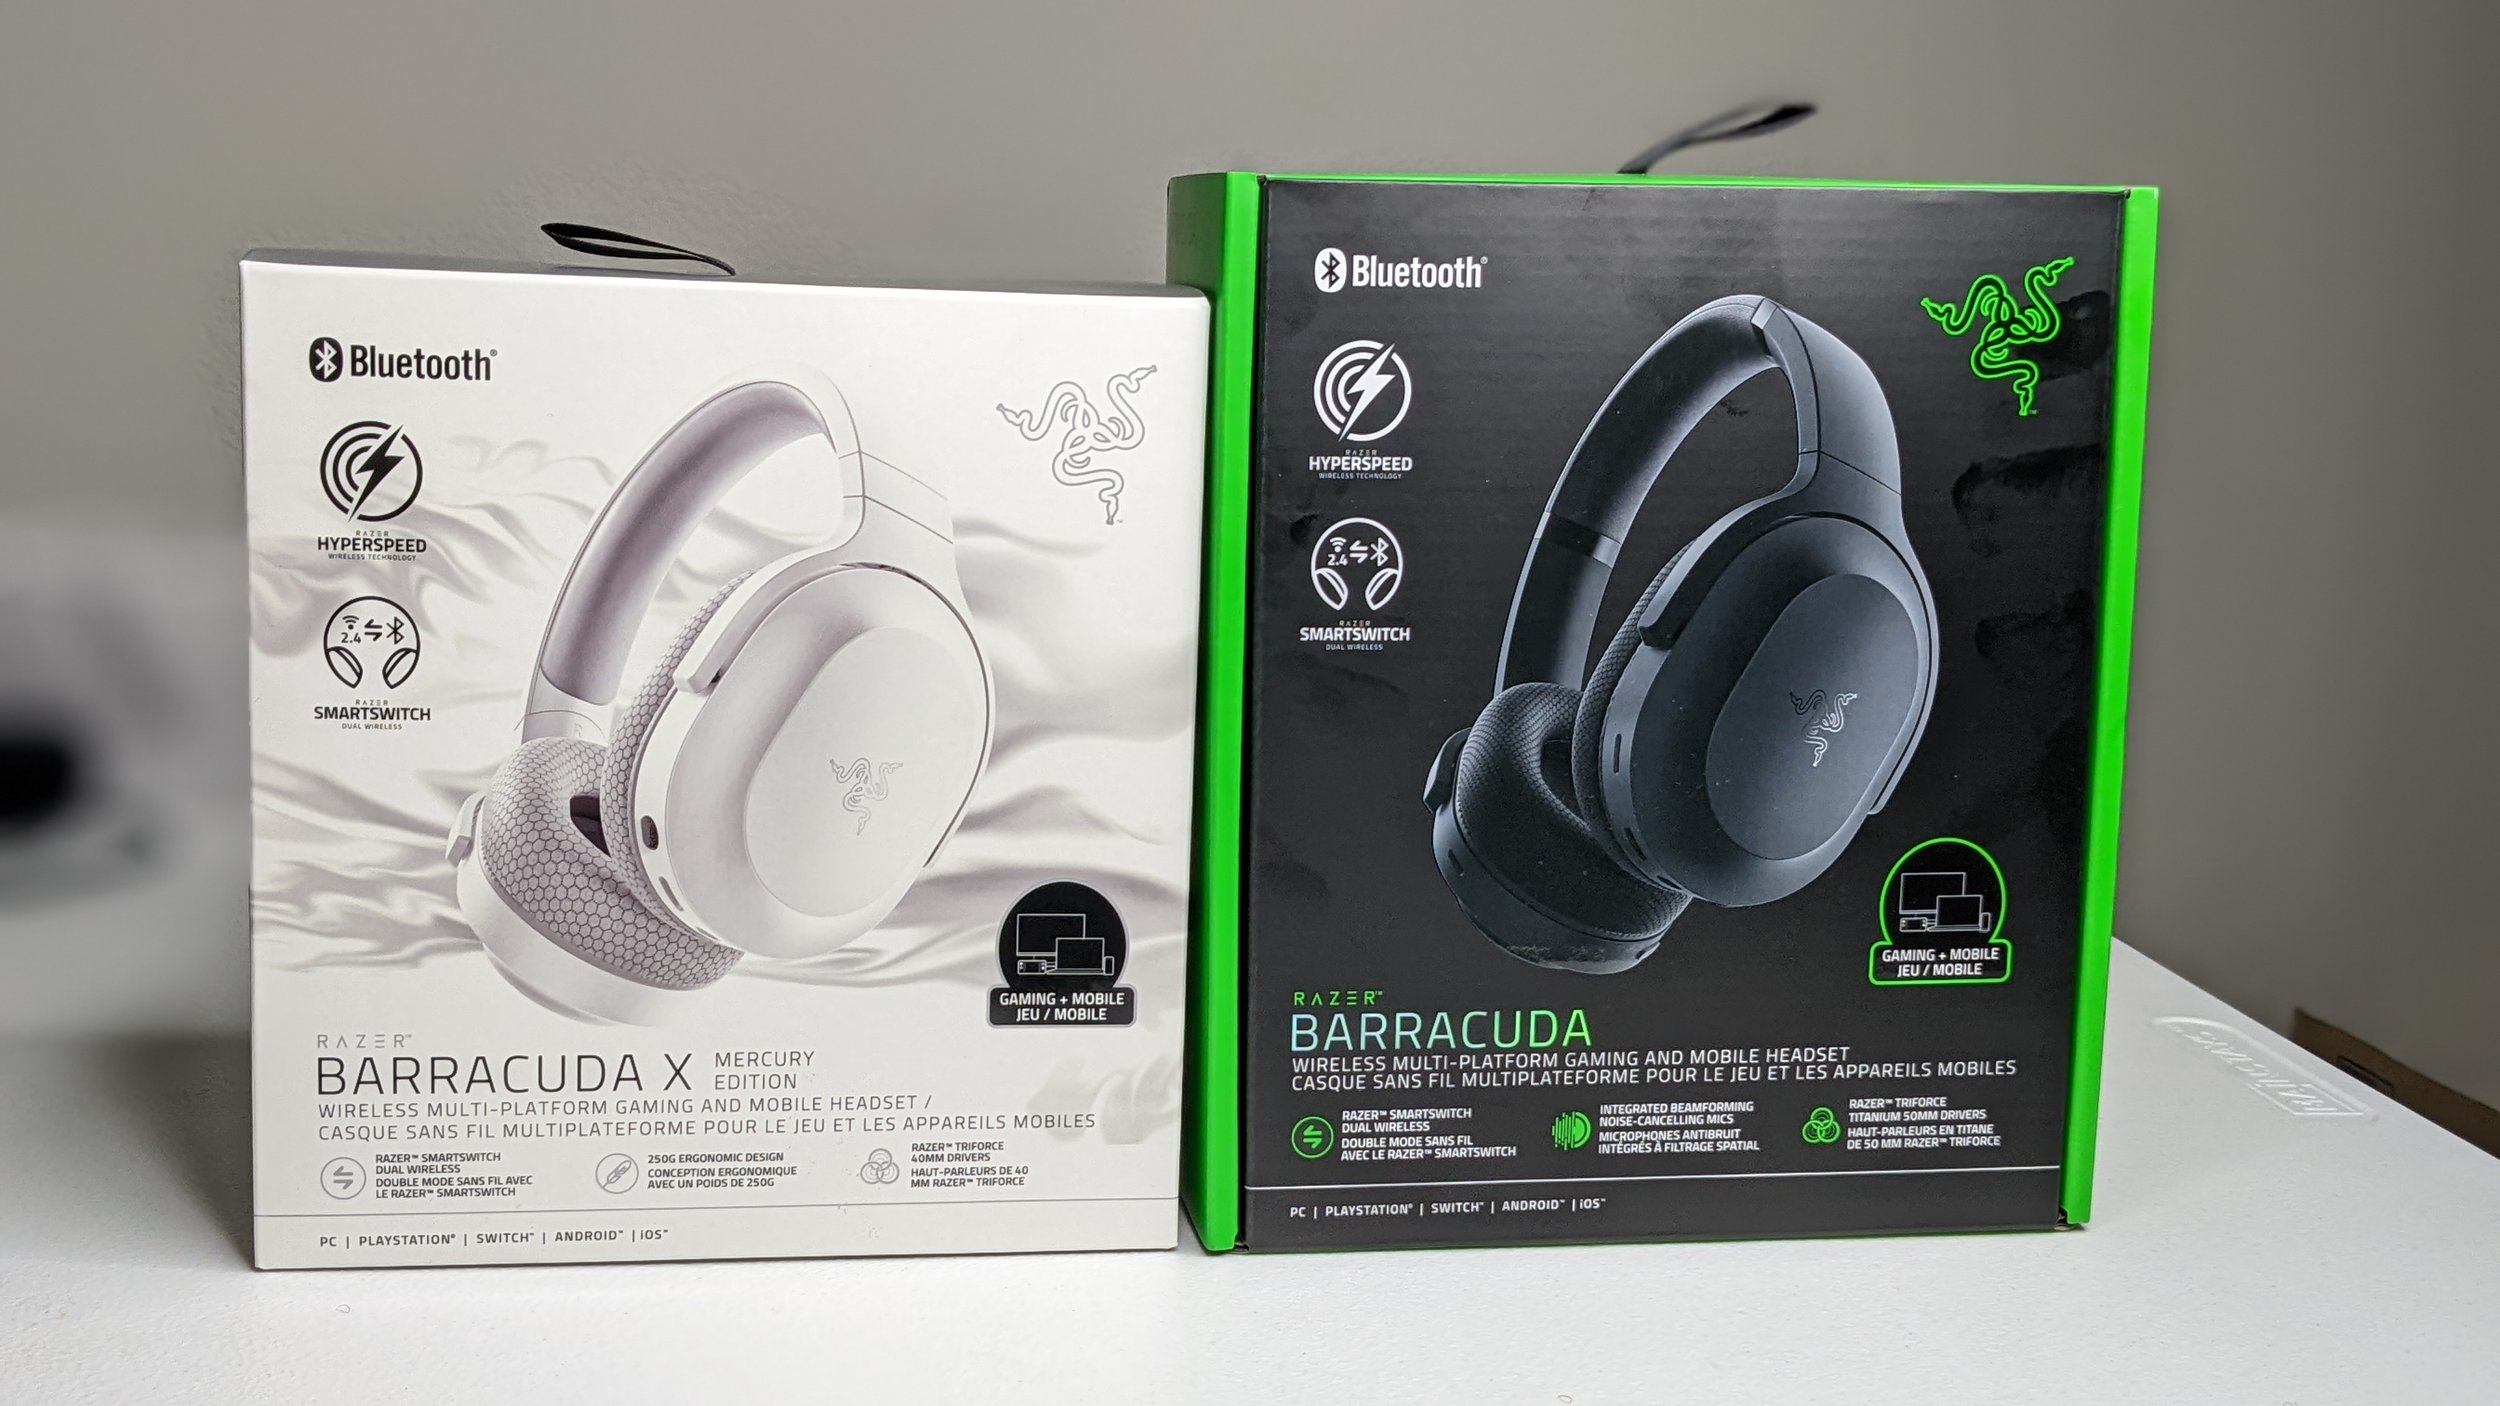 Razer Barracuda X Review: This Is the Budget Gaming Headset You Need